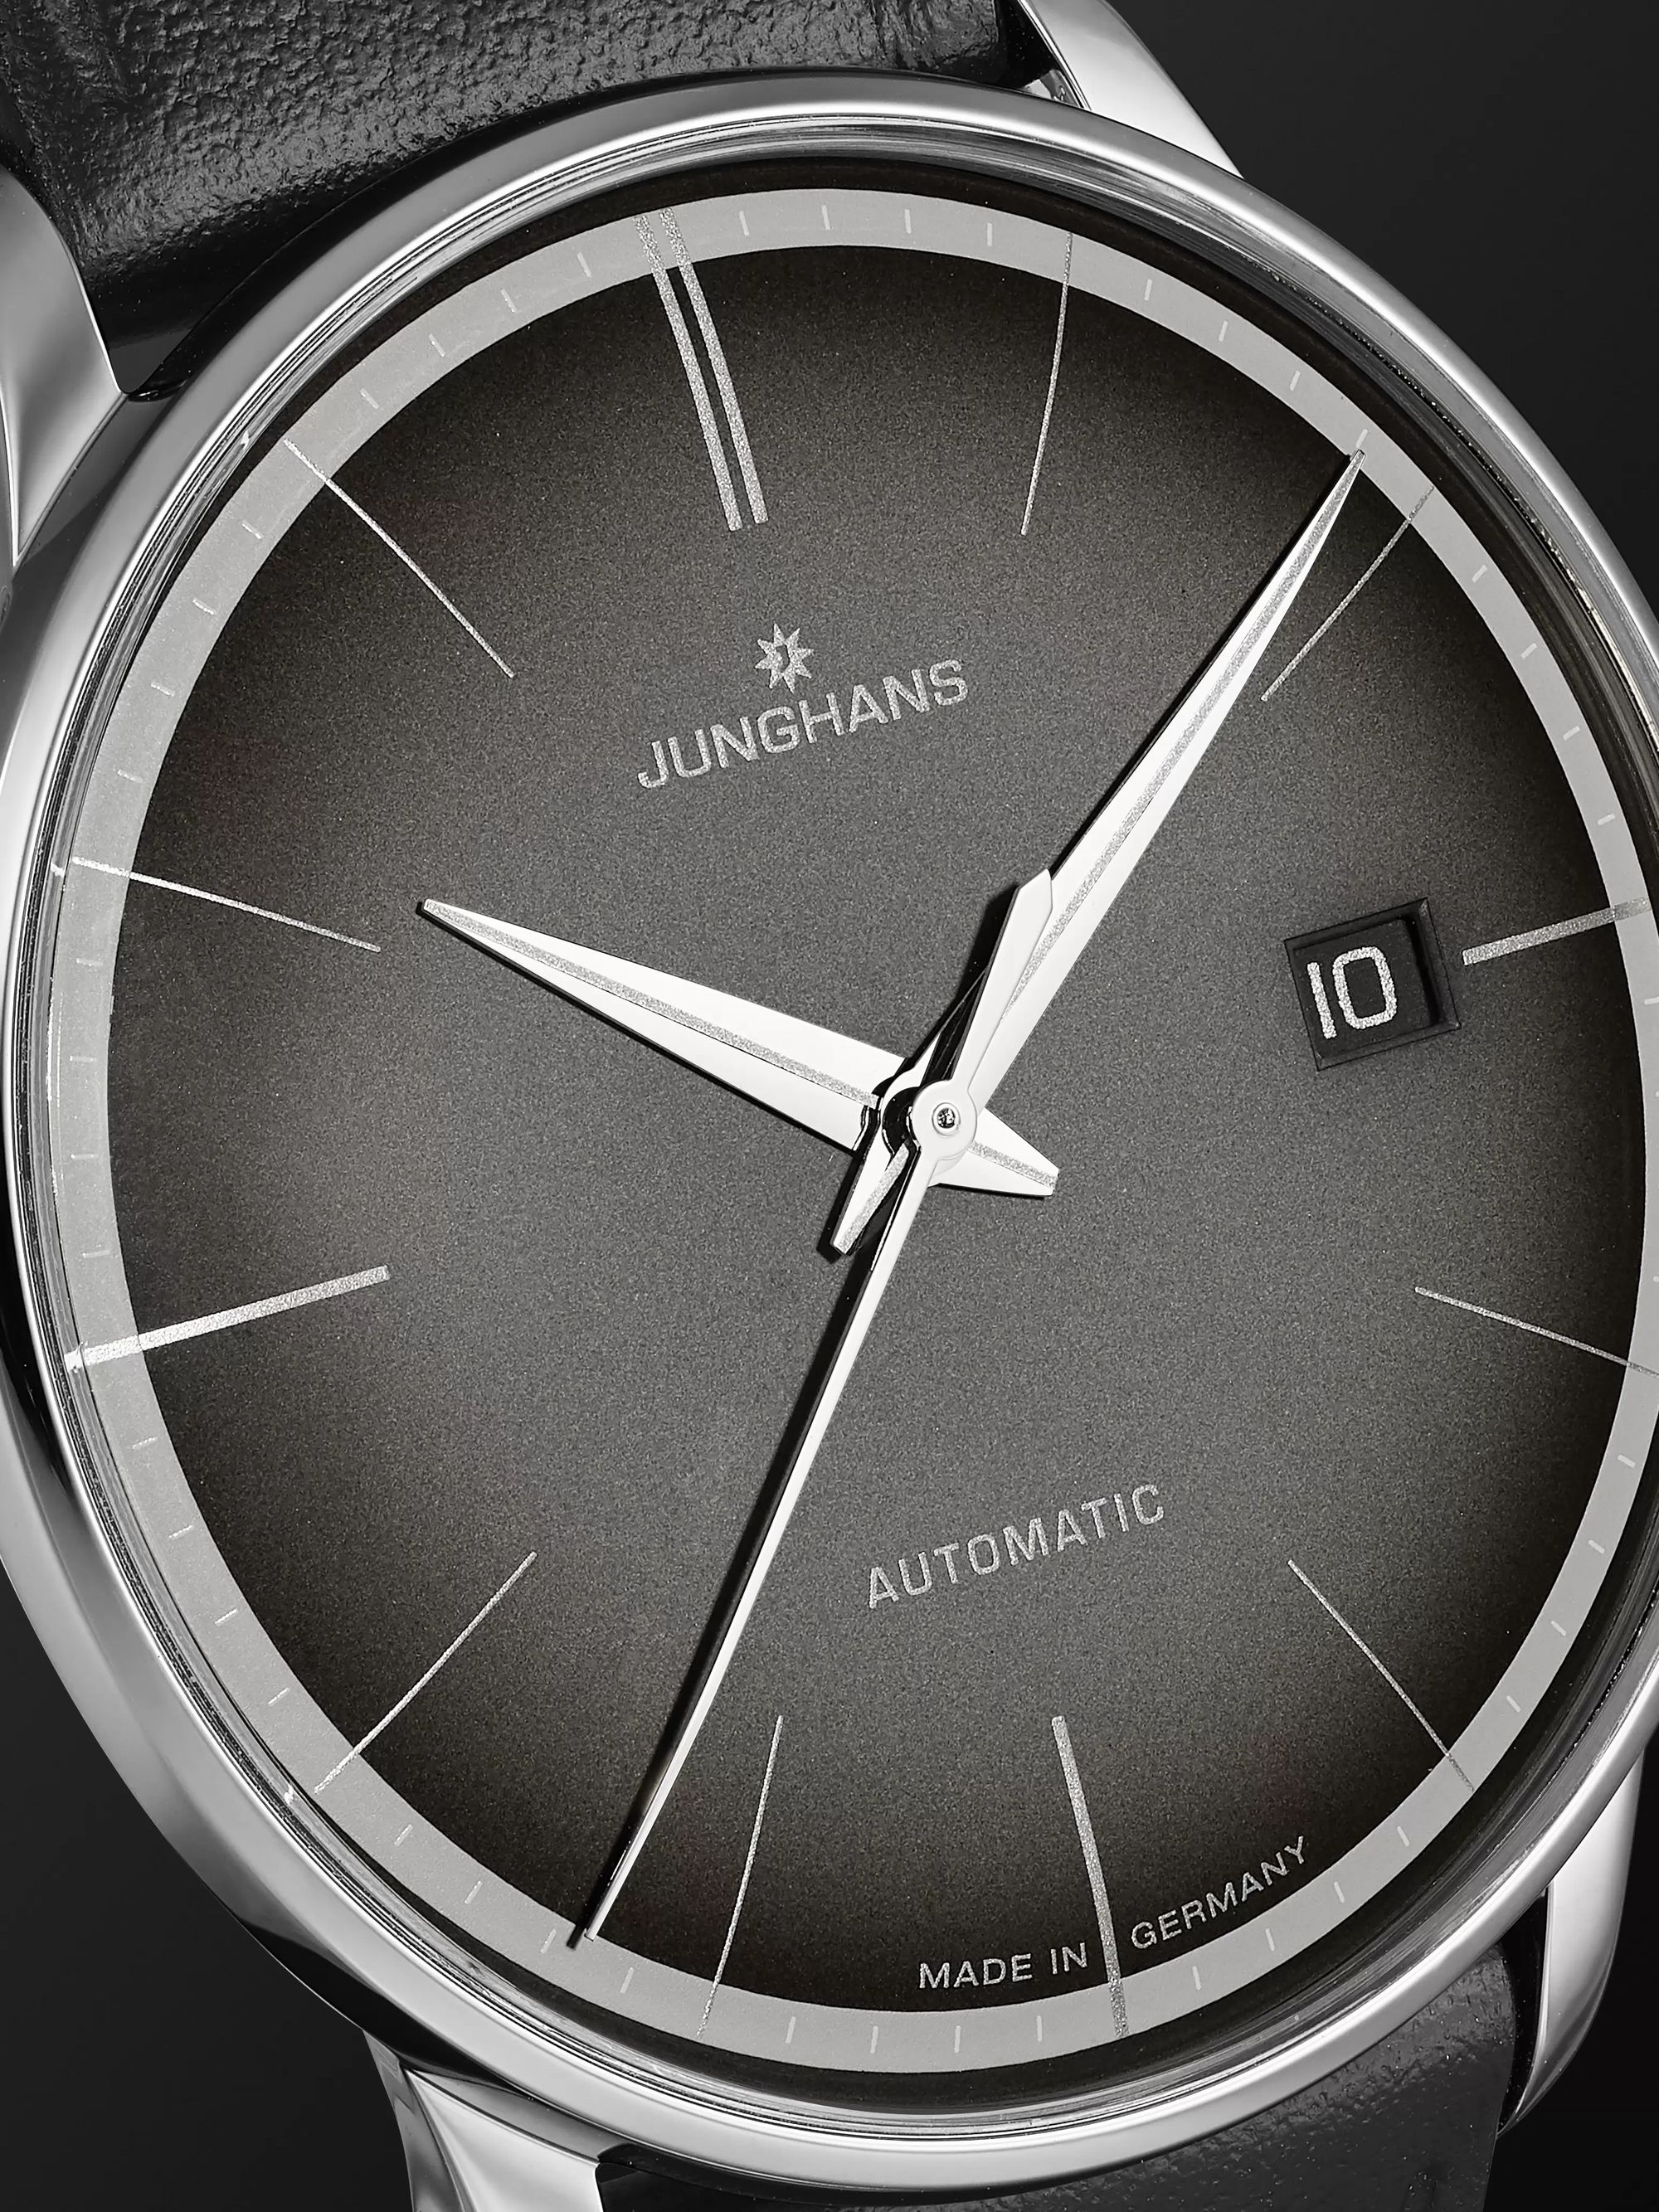 JUNGHANS Meister Automatic 38mm Stainless Steel and Leather Watch, Ref. No. 027/4051.00